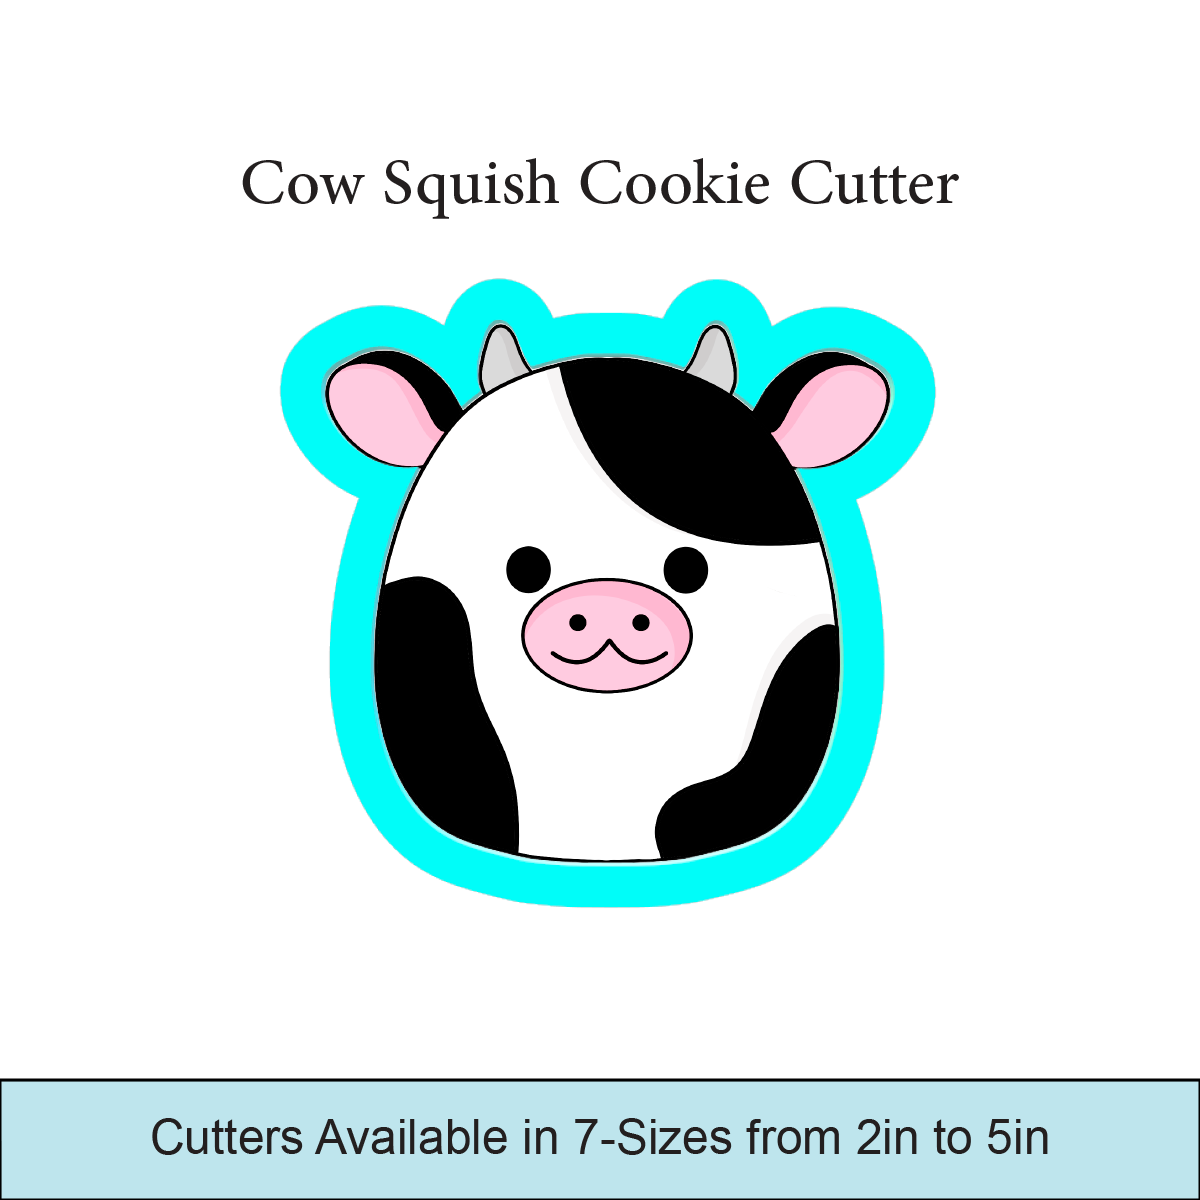 Cow Squish Cookie Cutters